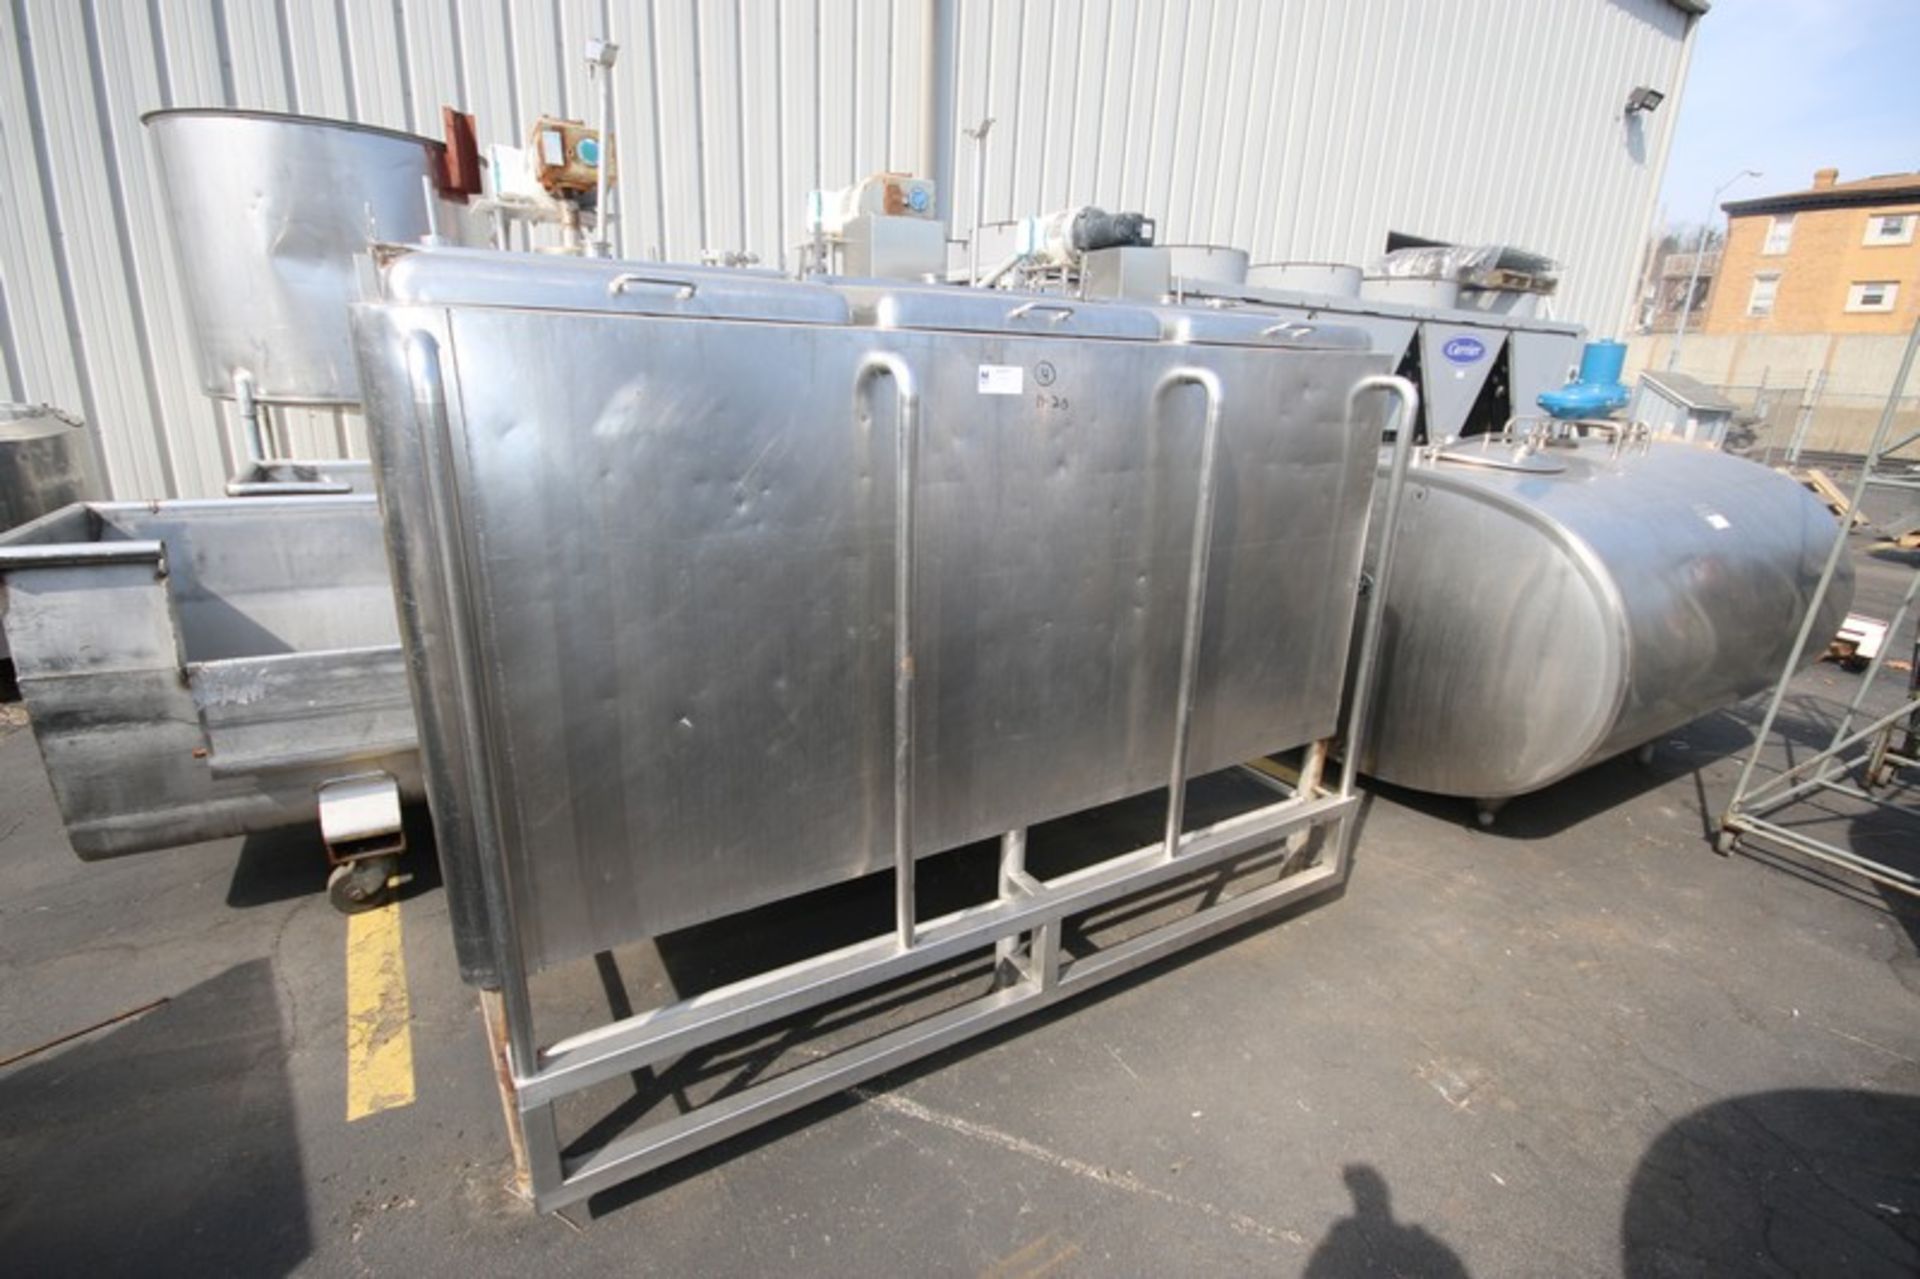 3-Compartment @ Aprox. 170 Gal. Insulated Mix Tank, Internal Compartment Dims.: Aprox. 27" L x 35" W